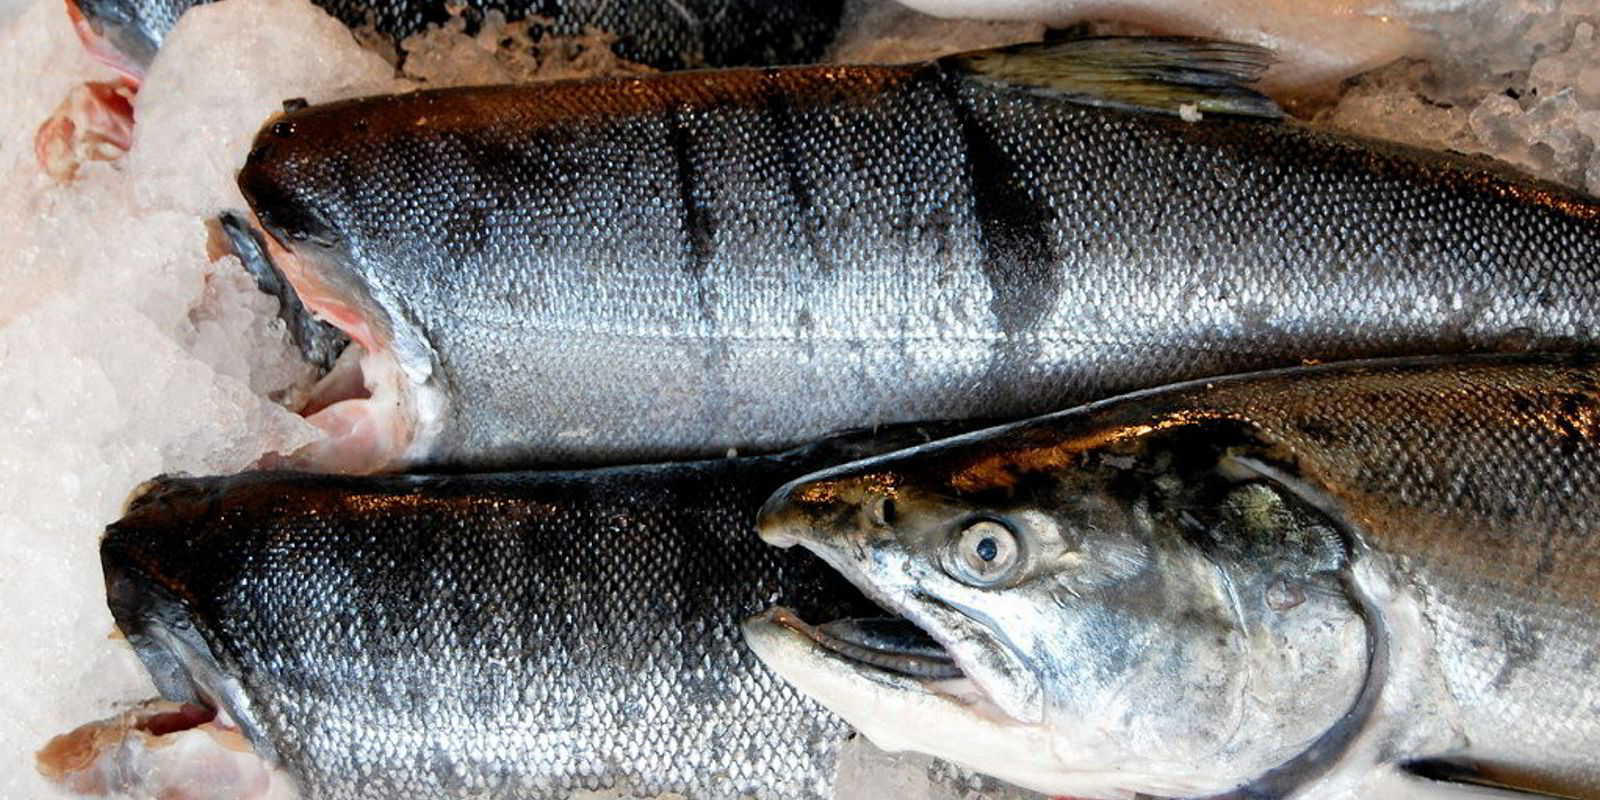 Russia’s wild salmon season kicks off with expectations of huge catches